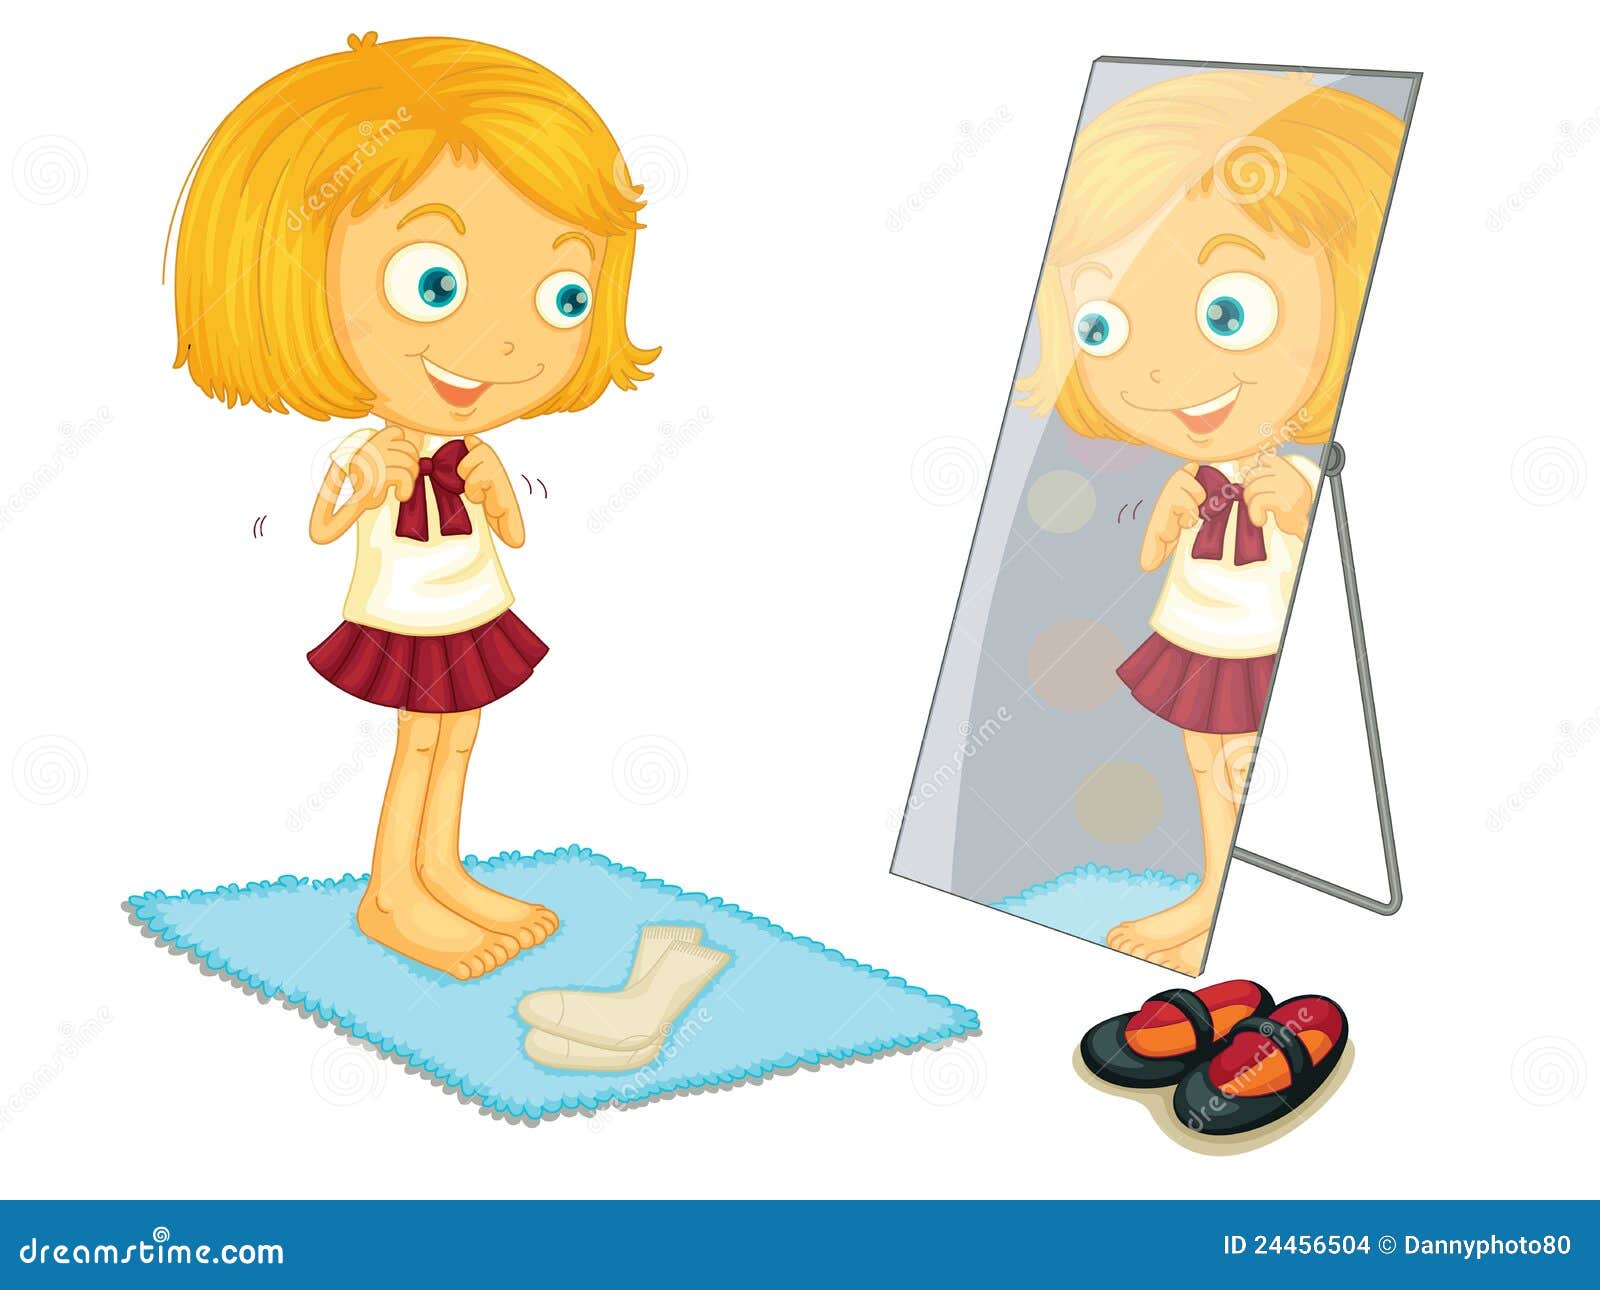 clipart girl getting dressed - photo #20